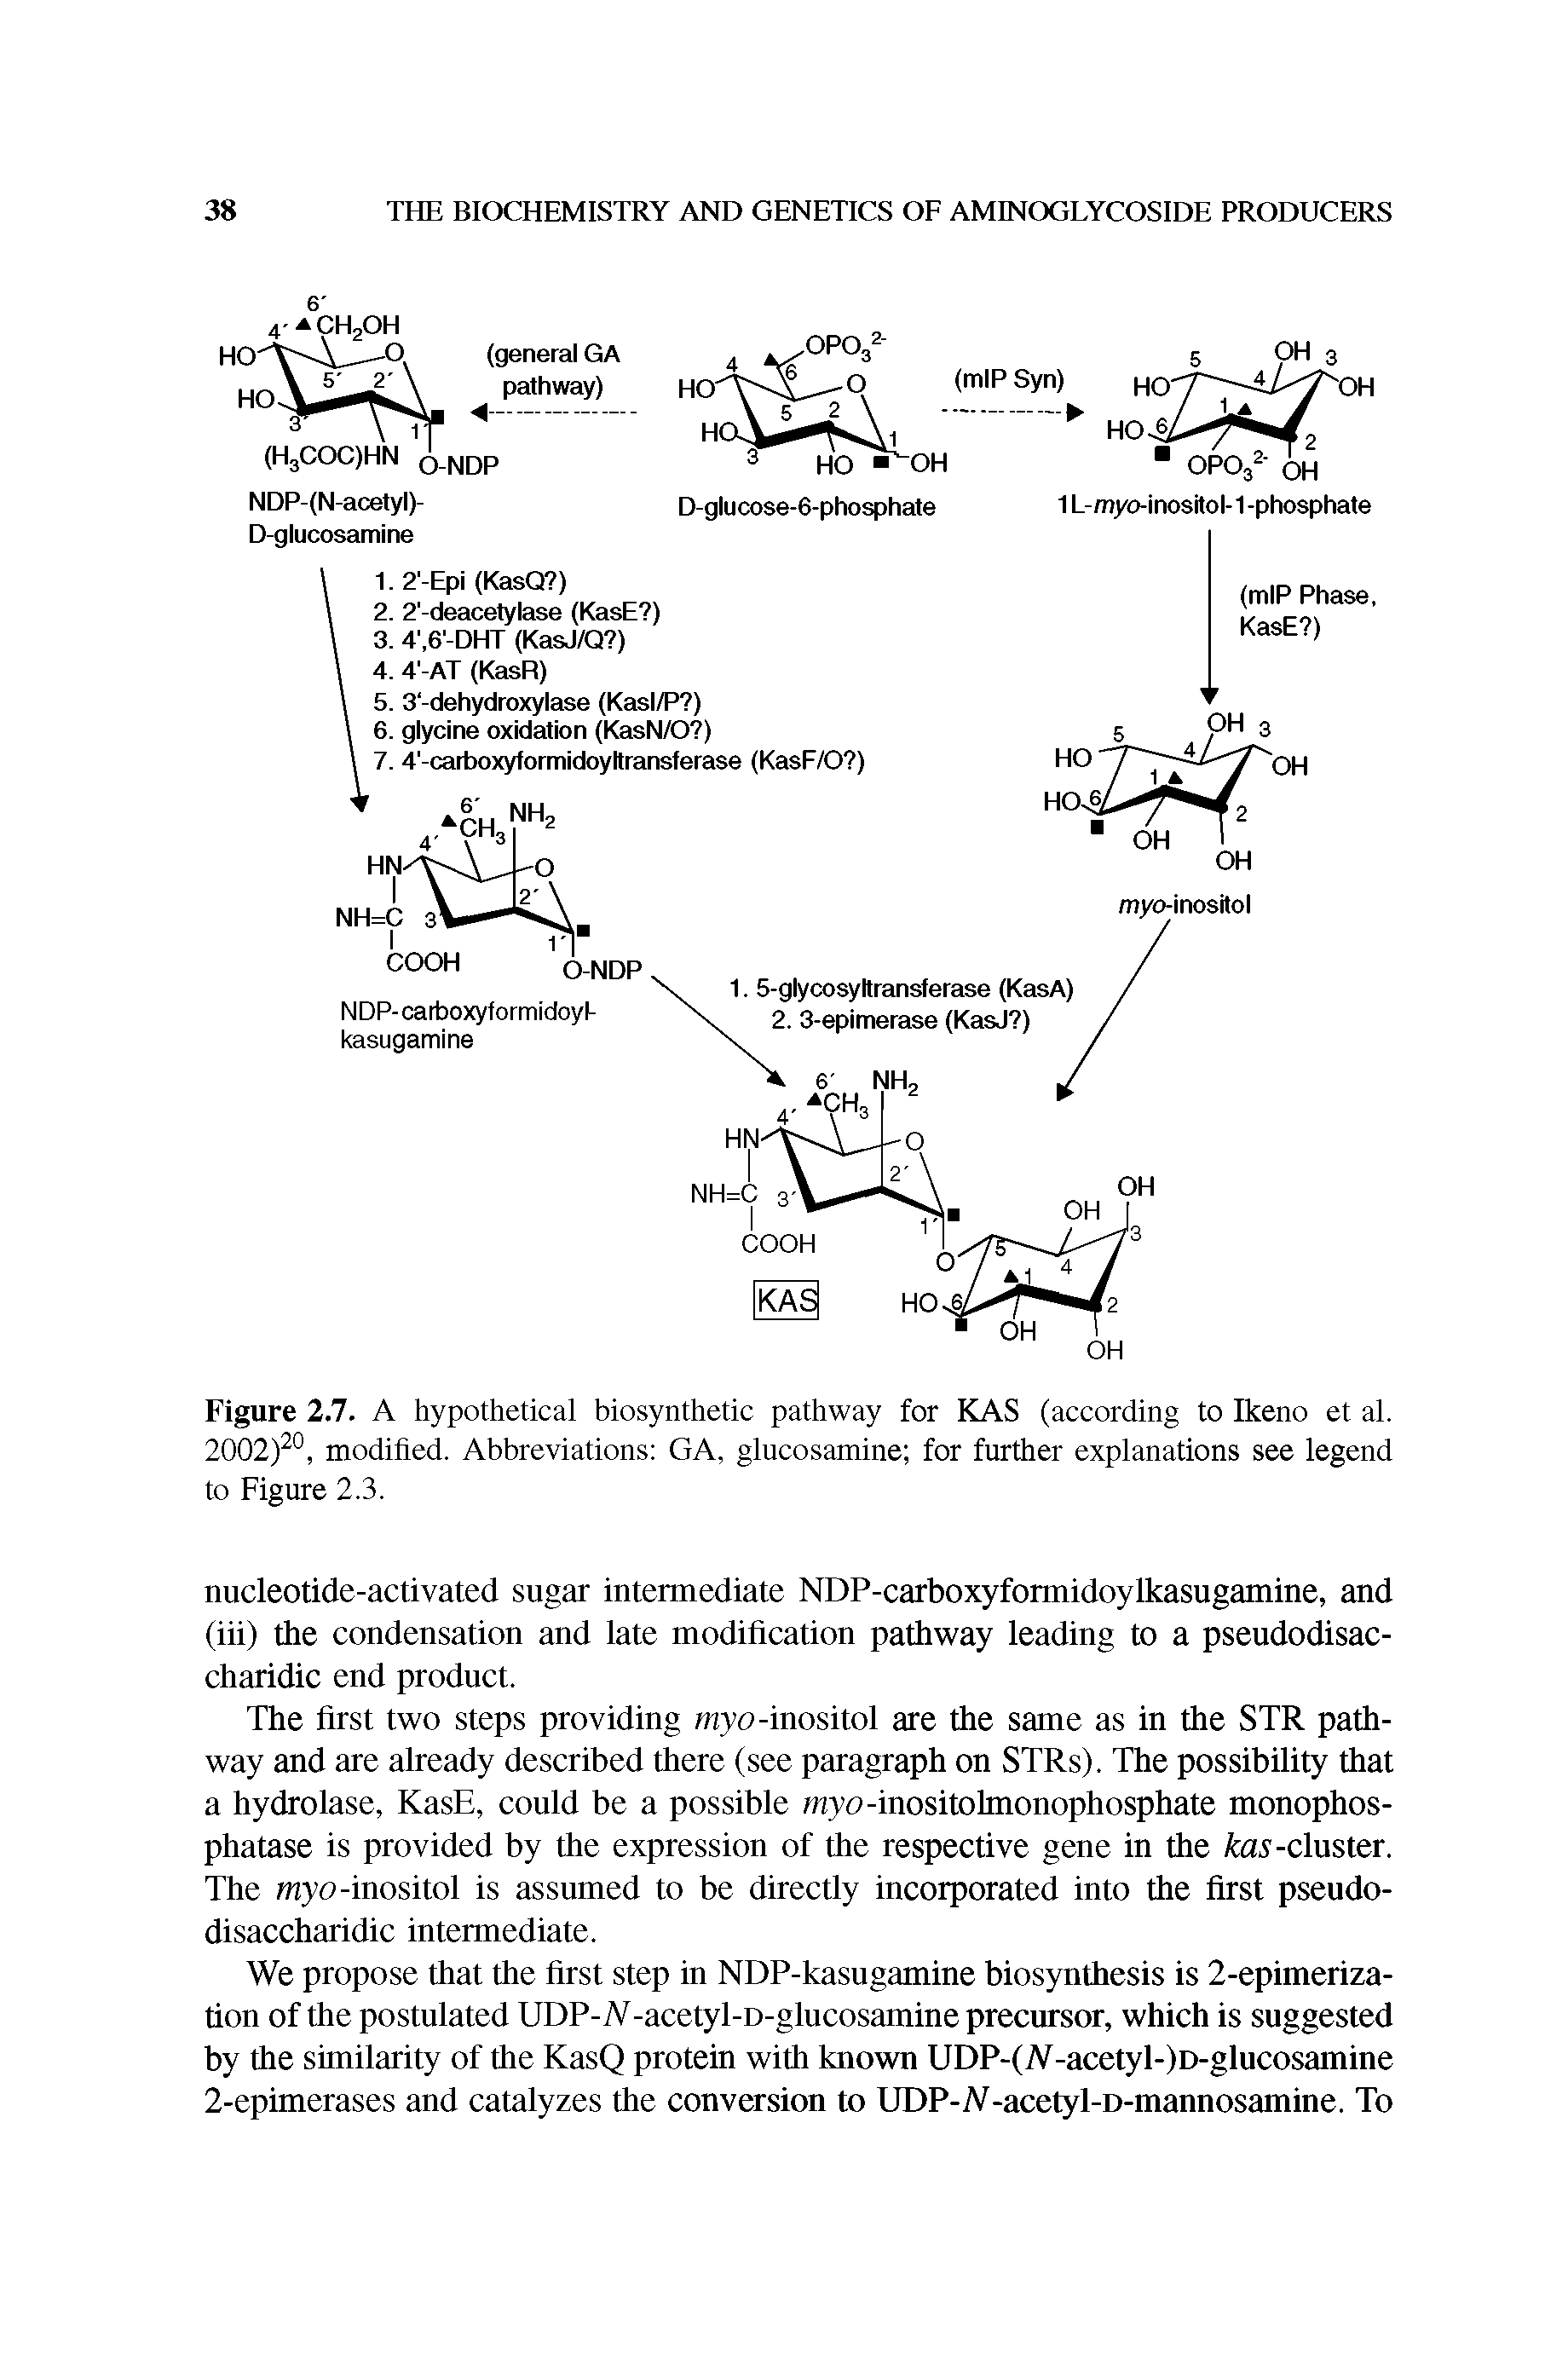 Figure 2.7. A hypothetical biosynthetic pathway for KAS (according to Ikeno et al. 2002) °, modified. Abbreviations GA, glucosamine for further explanations see legend to Figure 2.3.